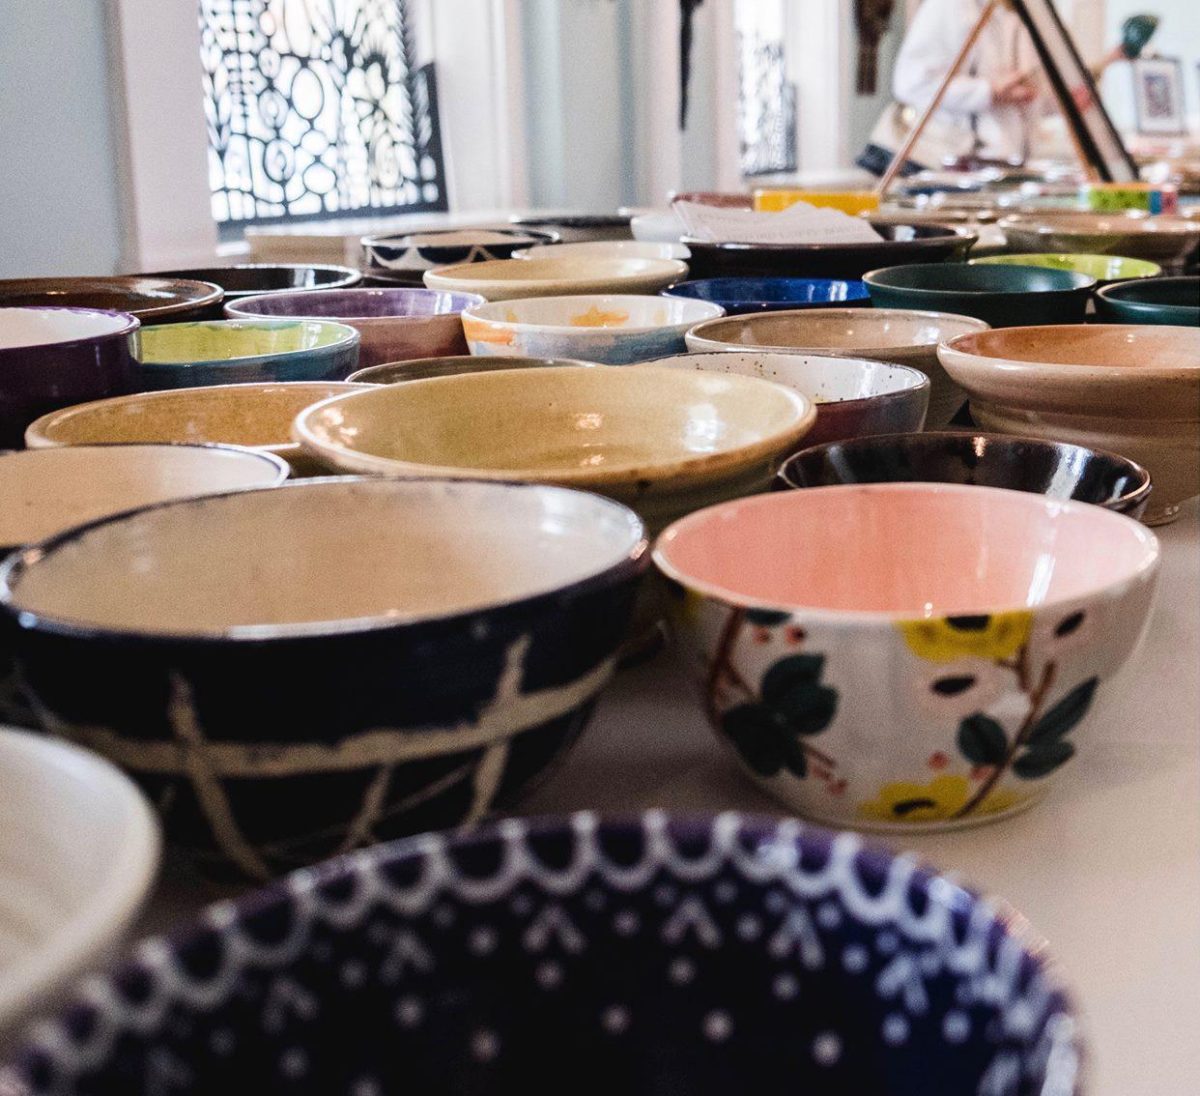 The+Oxford+Community+Arts+Center+expects+to+sell+up+to+1%2C300+bowls+on+Saturday.+Photo+contributed+by+Oxford+Empty+Bowls